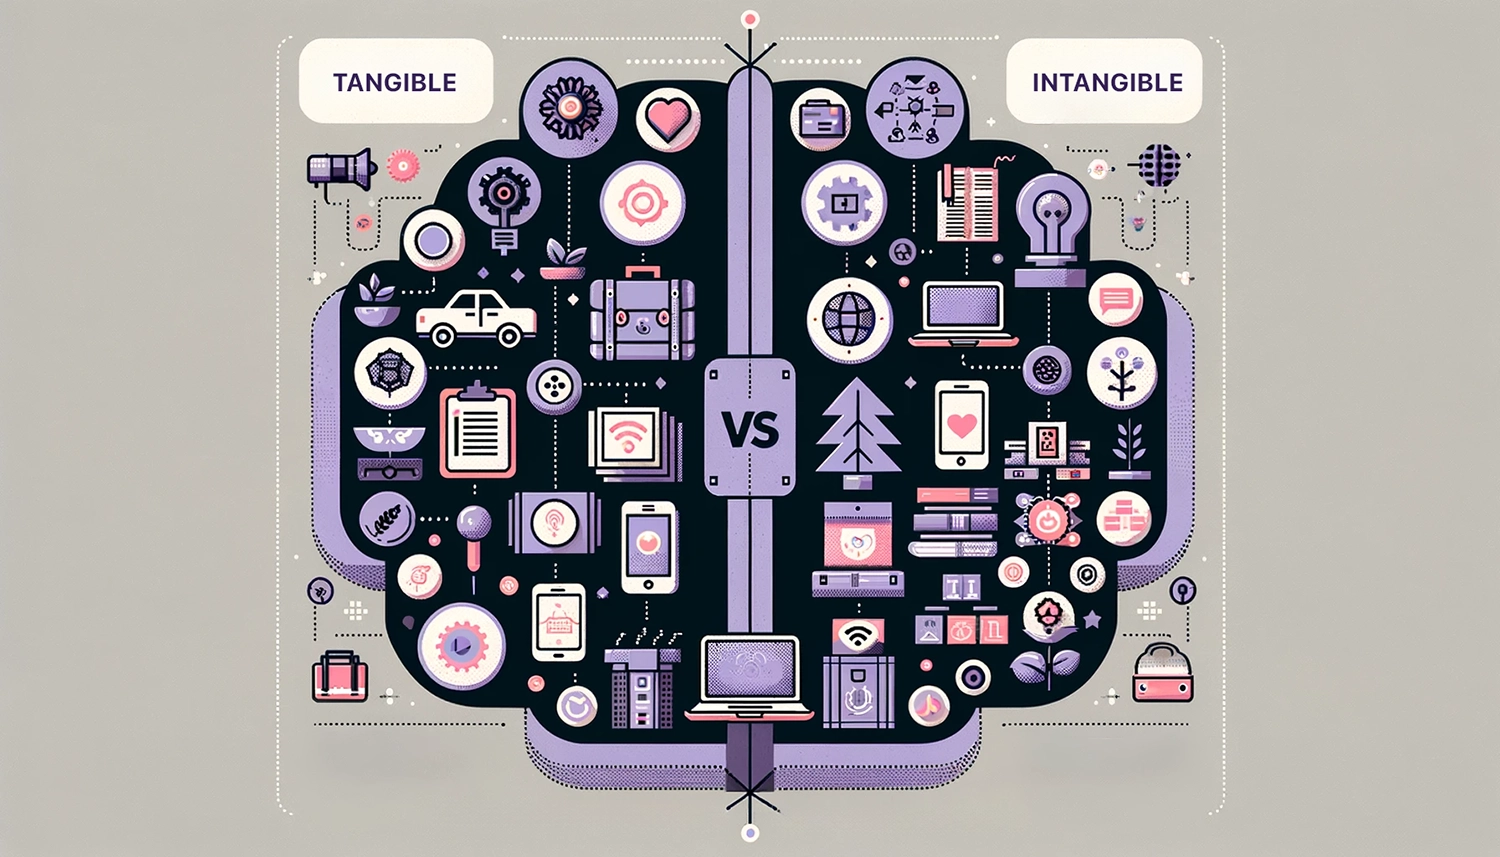 Tangible vs intangible products